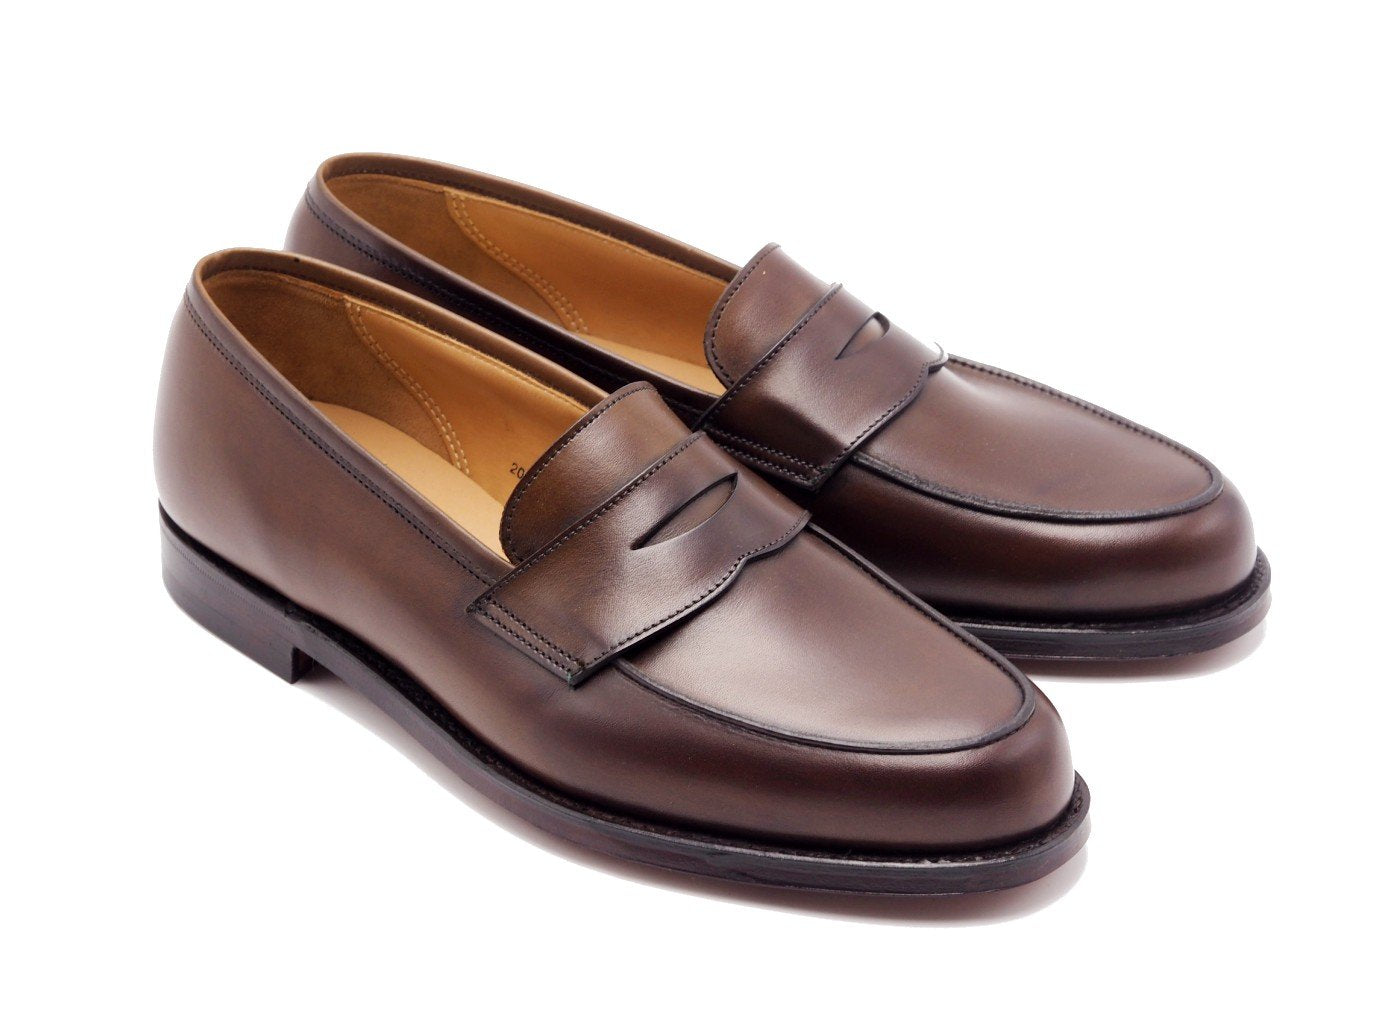 Front angle view of Crockett & Jones Kirribilli penny loafers in dark brown burnished calf